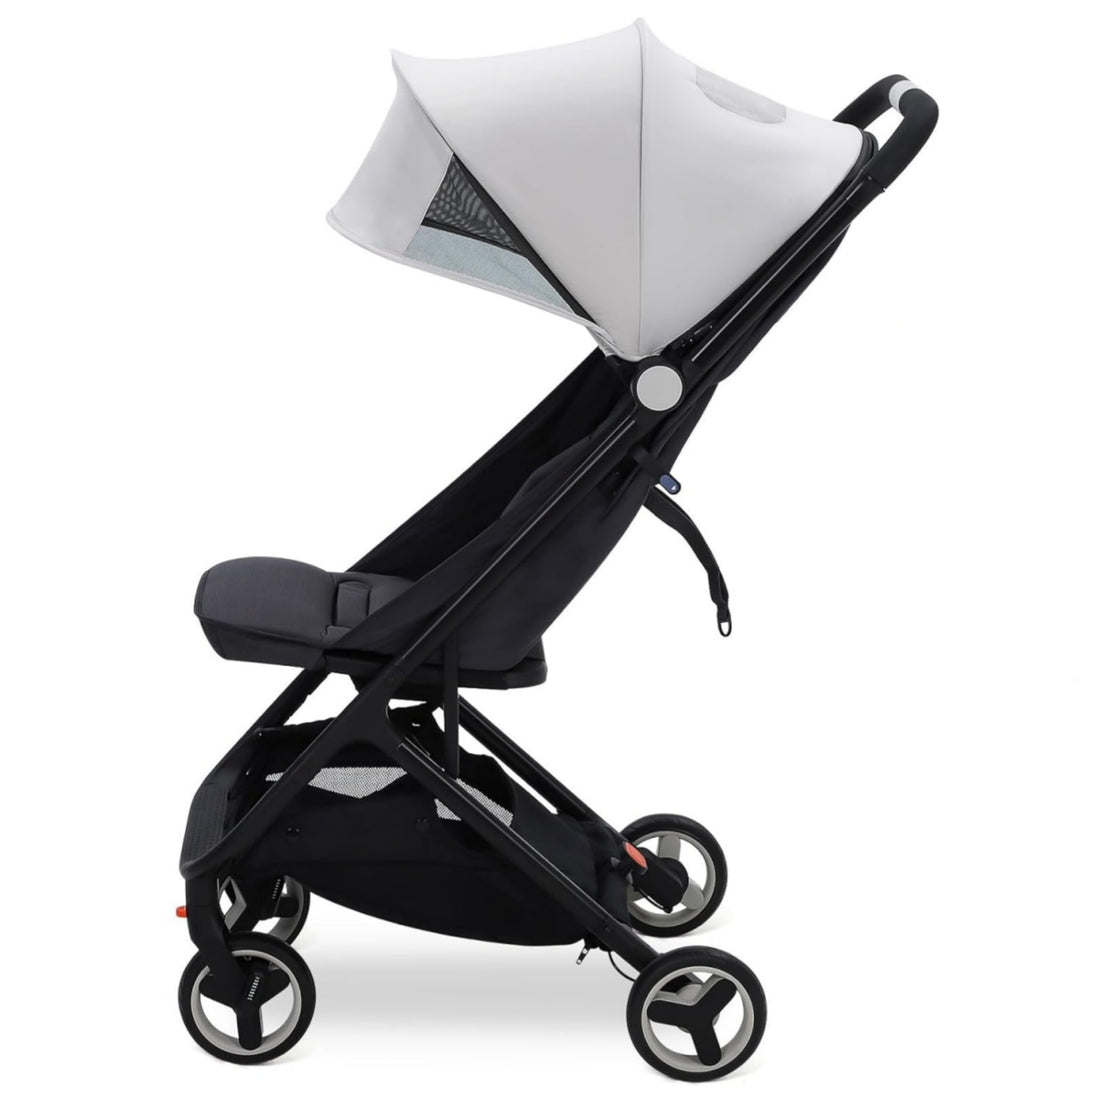 Lightweight Travel Stroller, Compact, Airplane-Friendly, One-Hand Fold, Reclining Seat, Canopy